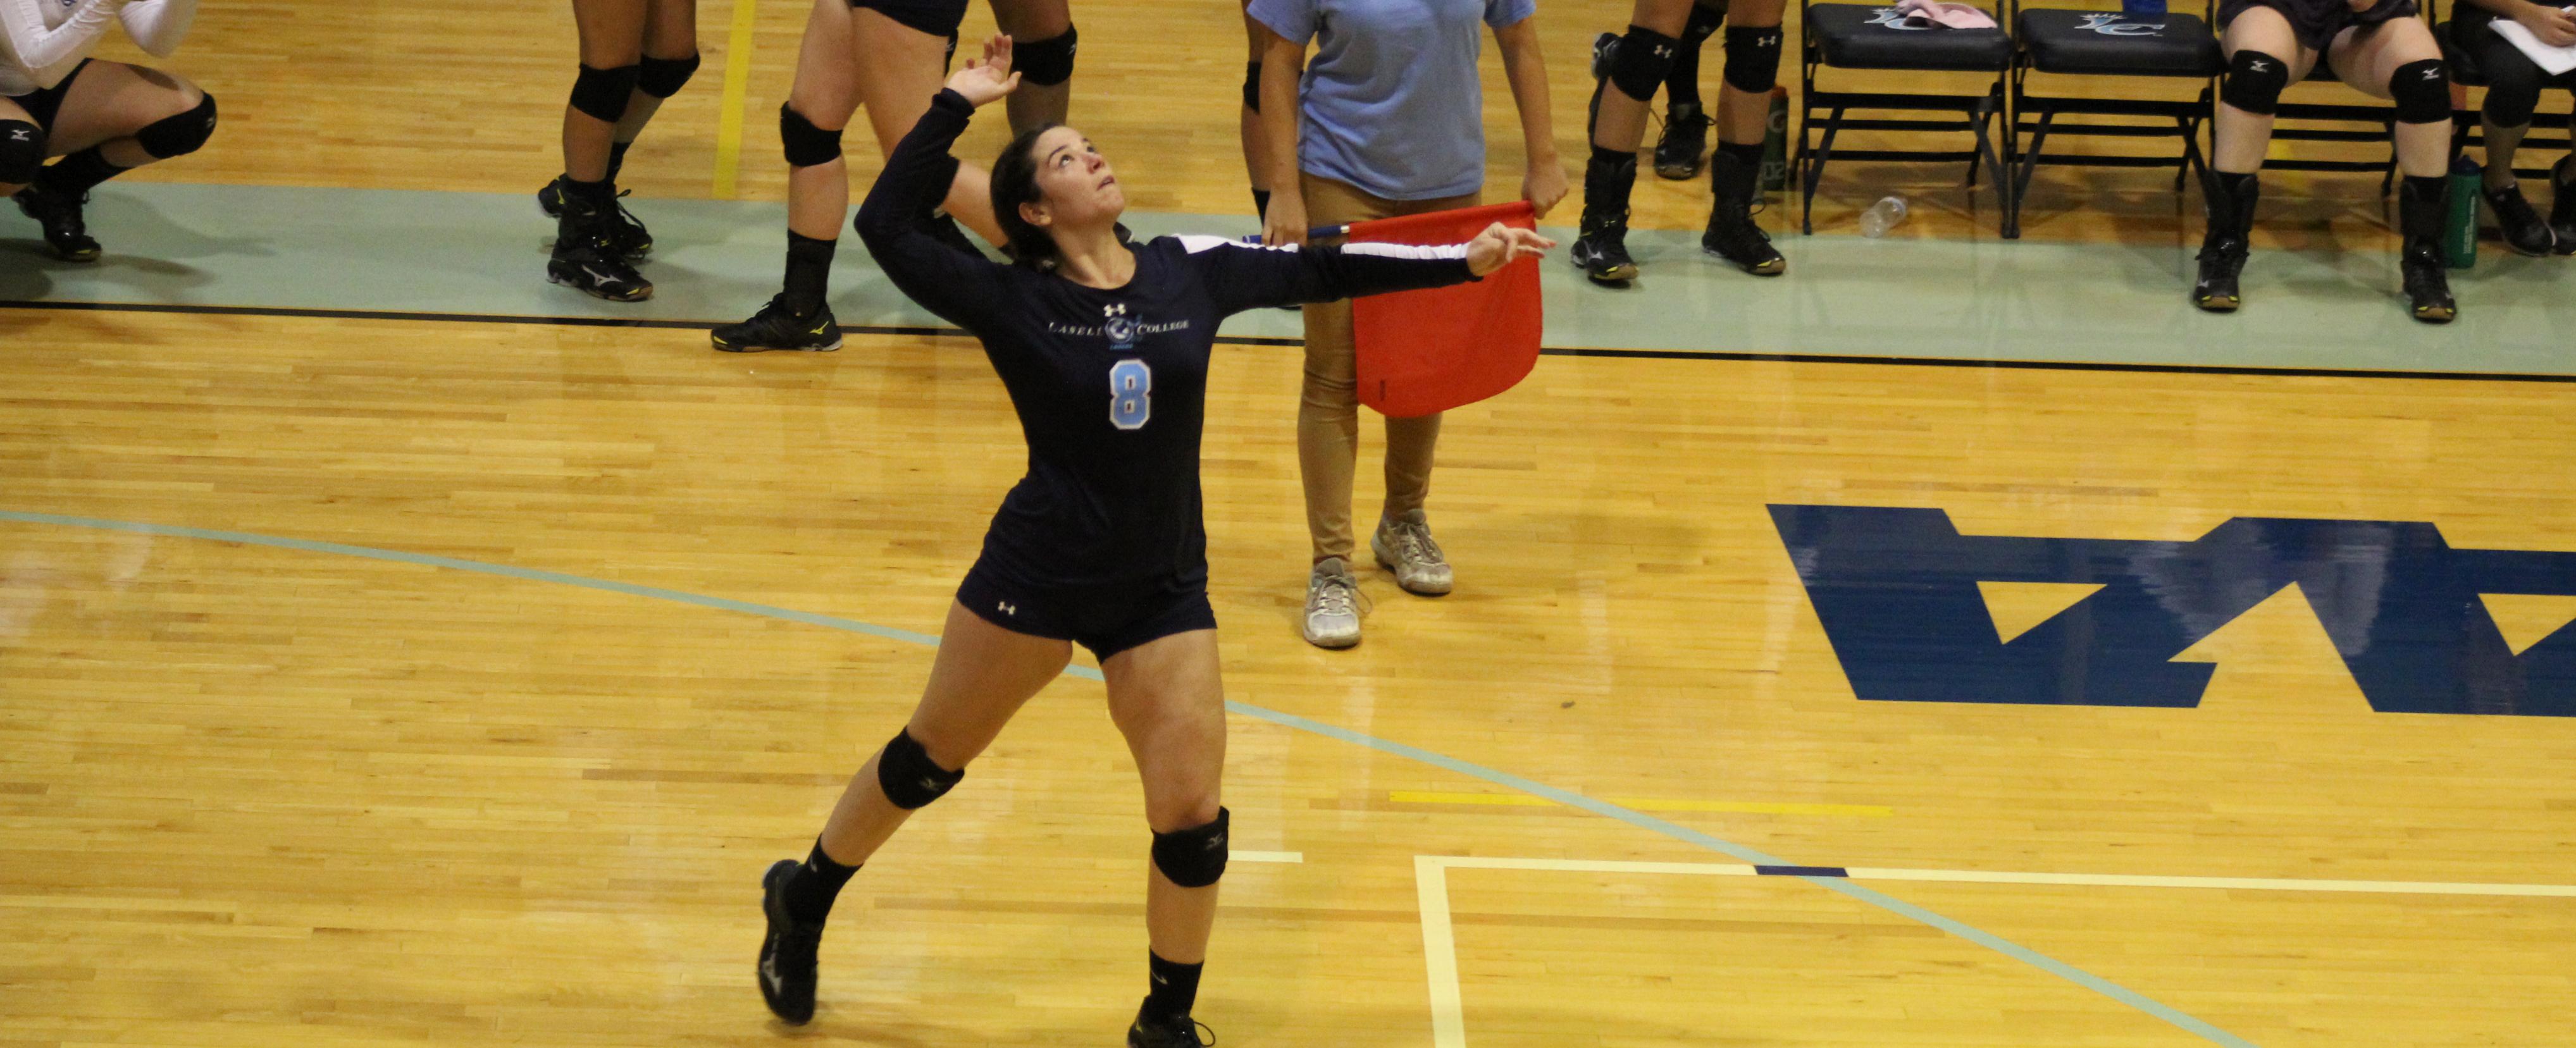 Women's Volleyball Sweeps Tri-Match with UMass Dartmouth and Eastern Nazarene